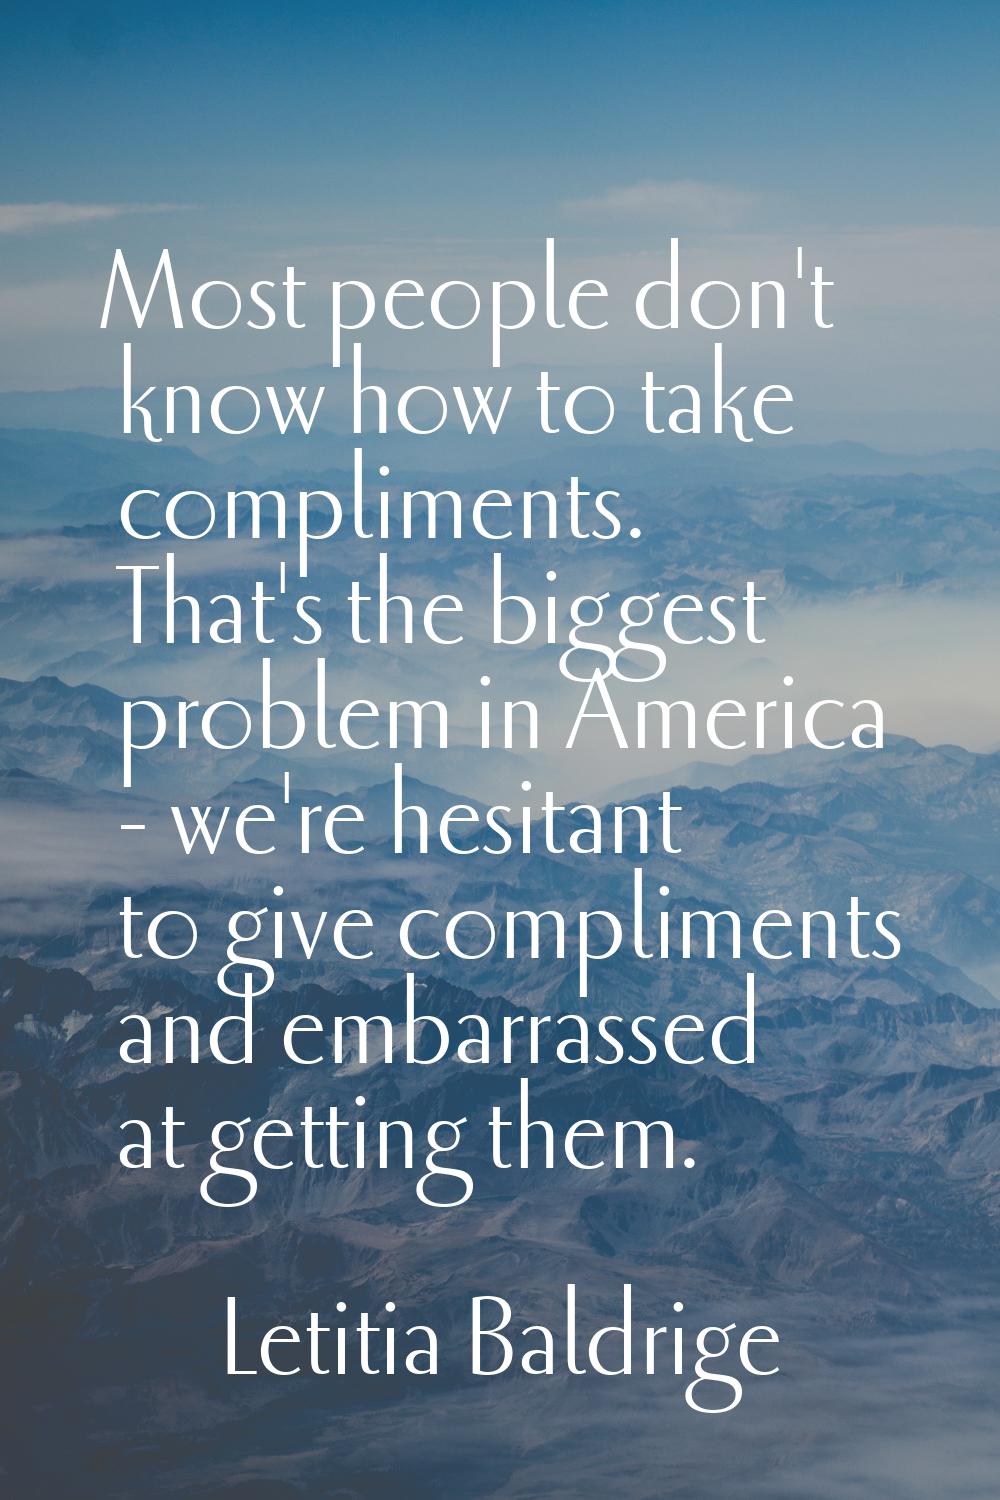 Most people don't know how to take compliments. That's the biggest problem in America - we're hesit